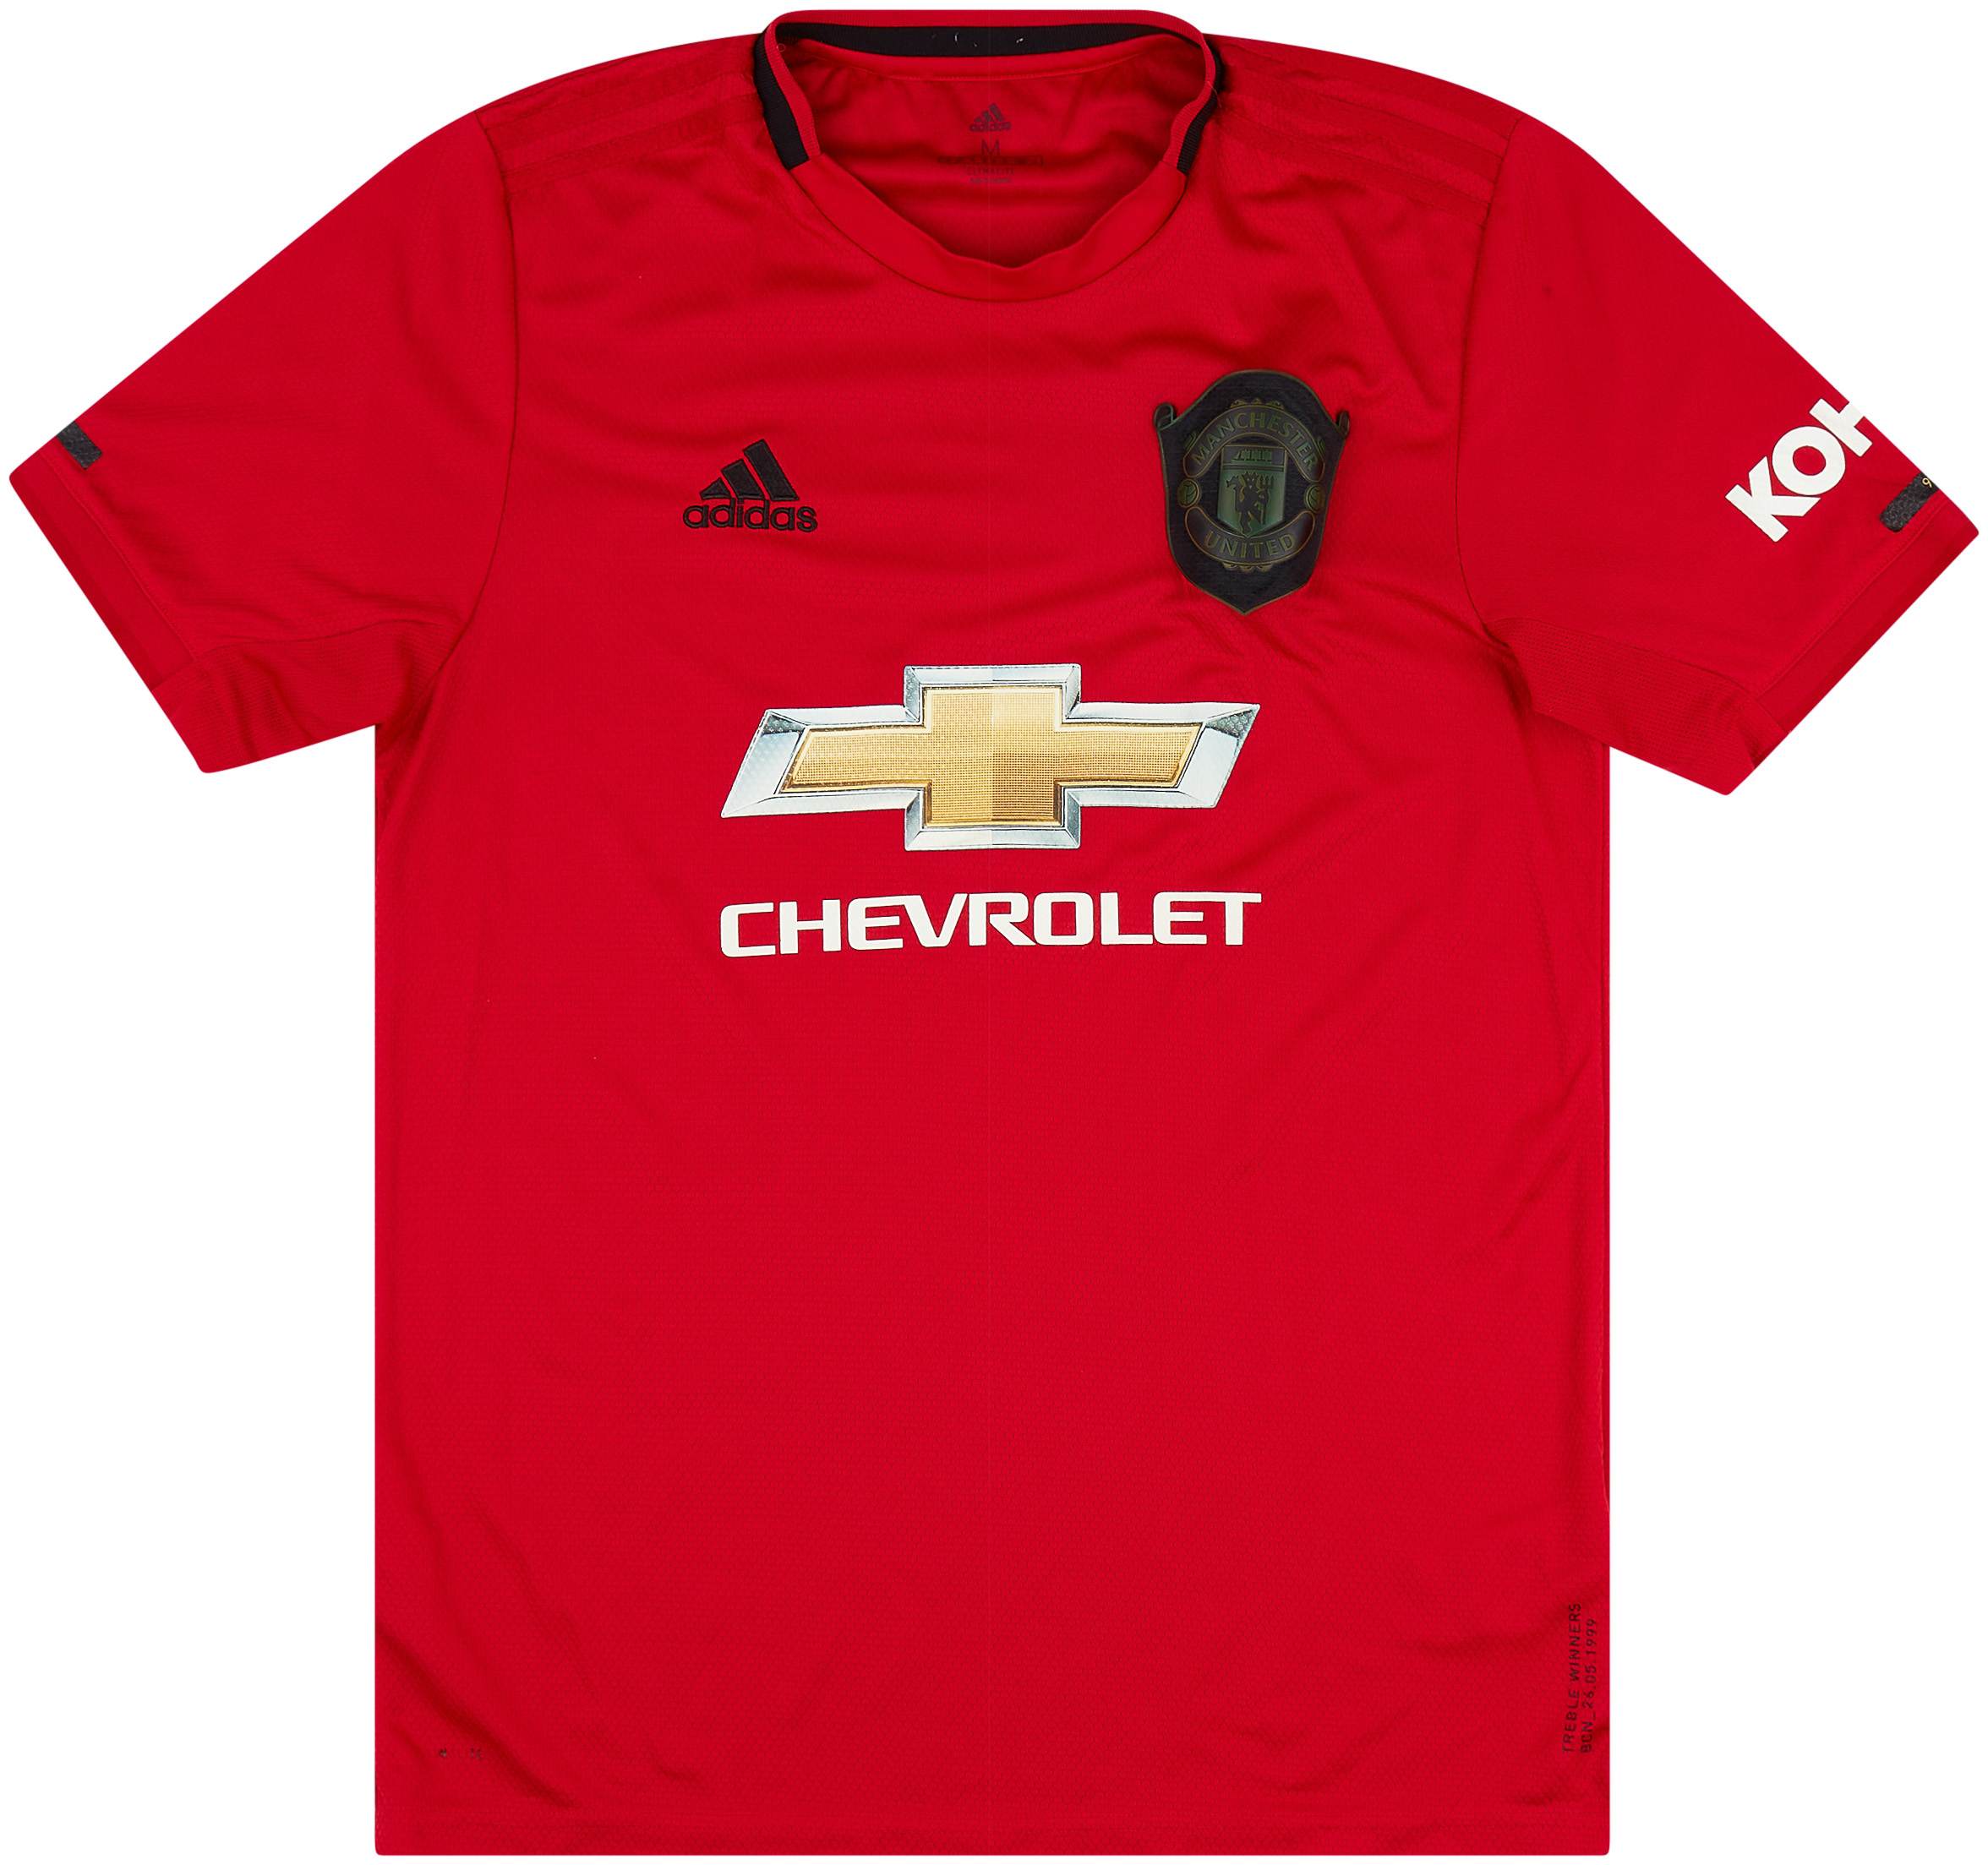 2019-20 Manchester United Home Shirt - 5/10 - ()